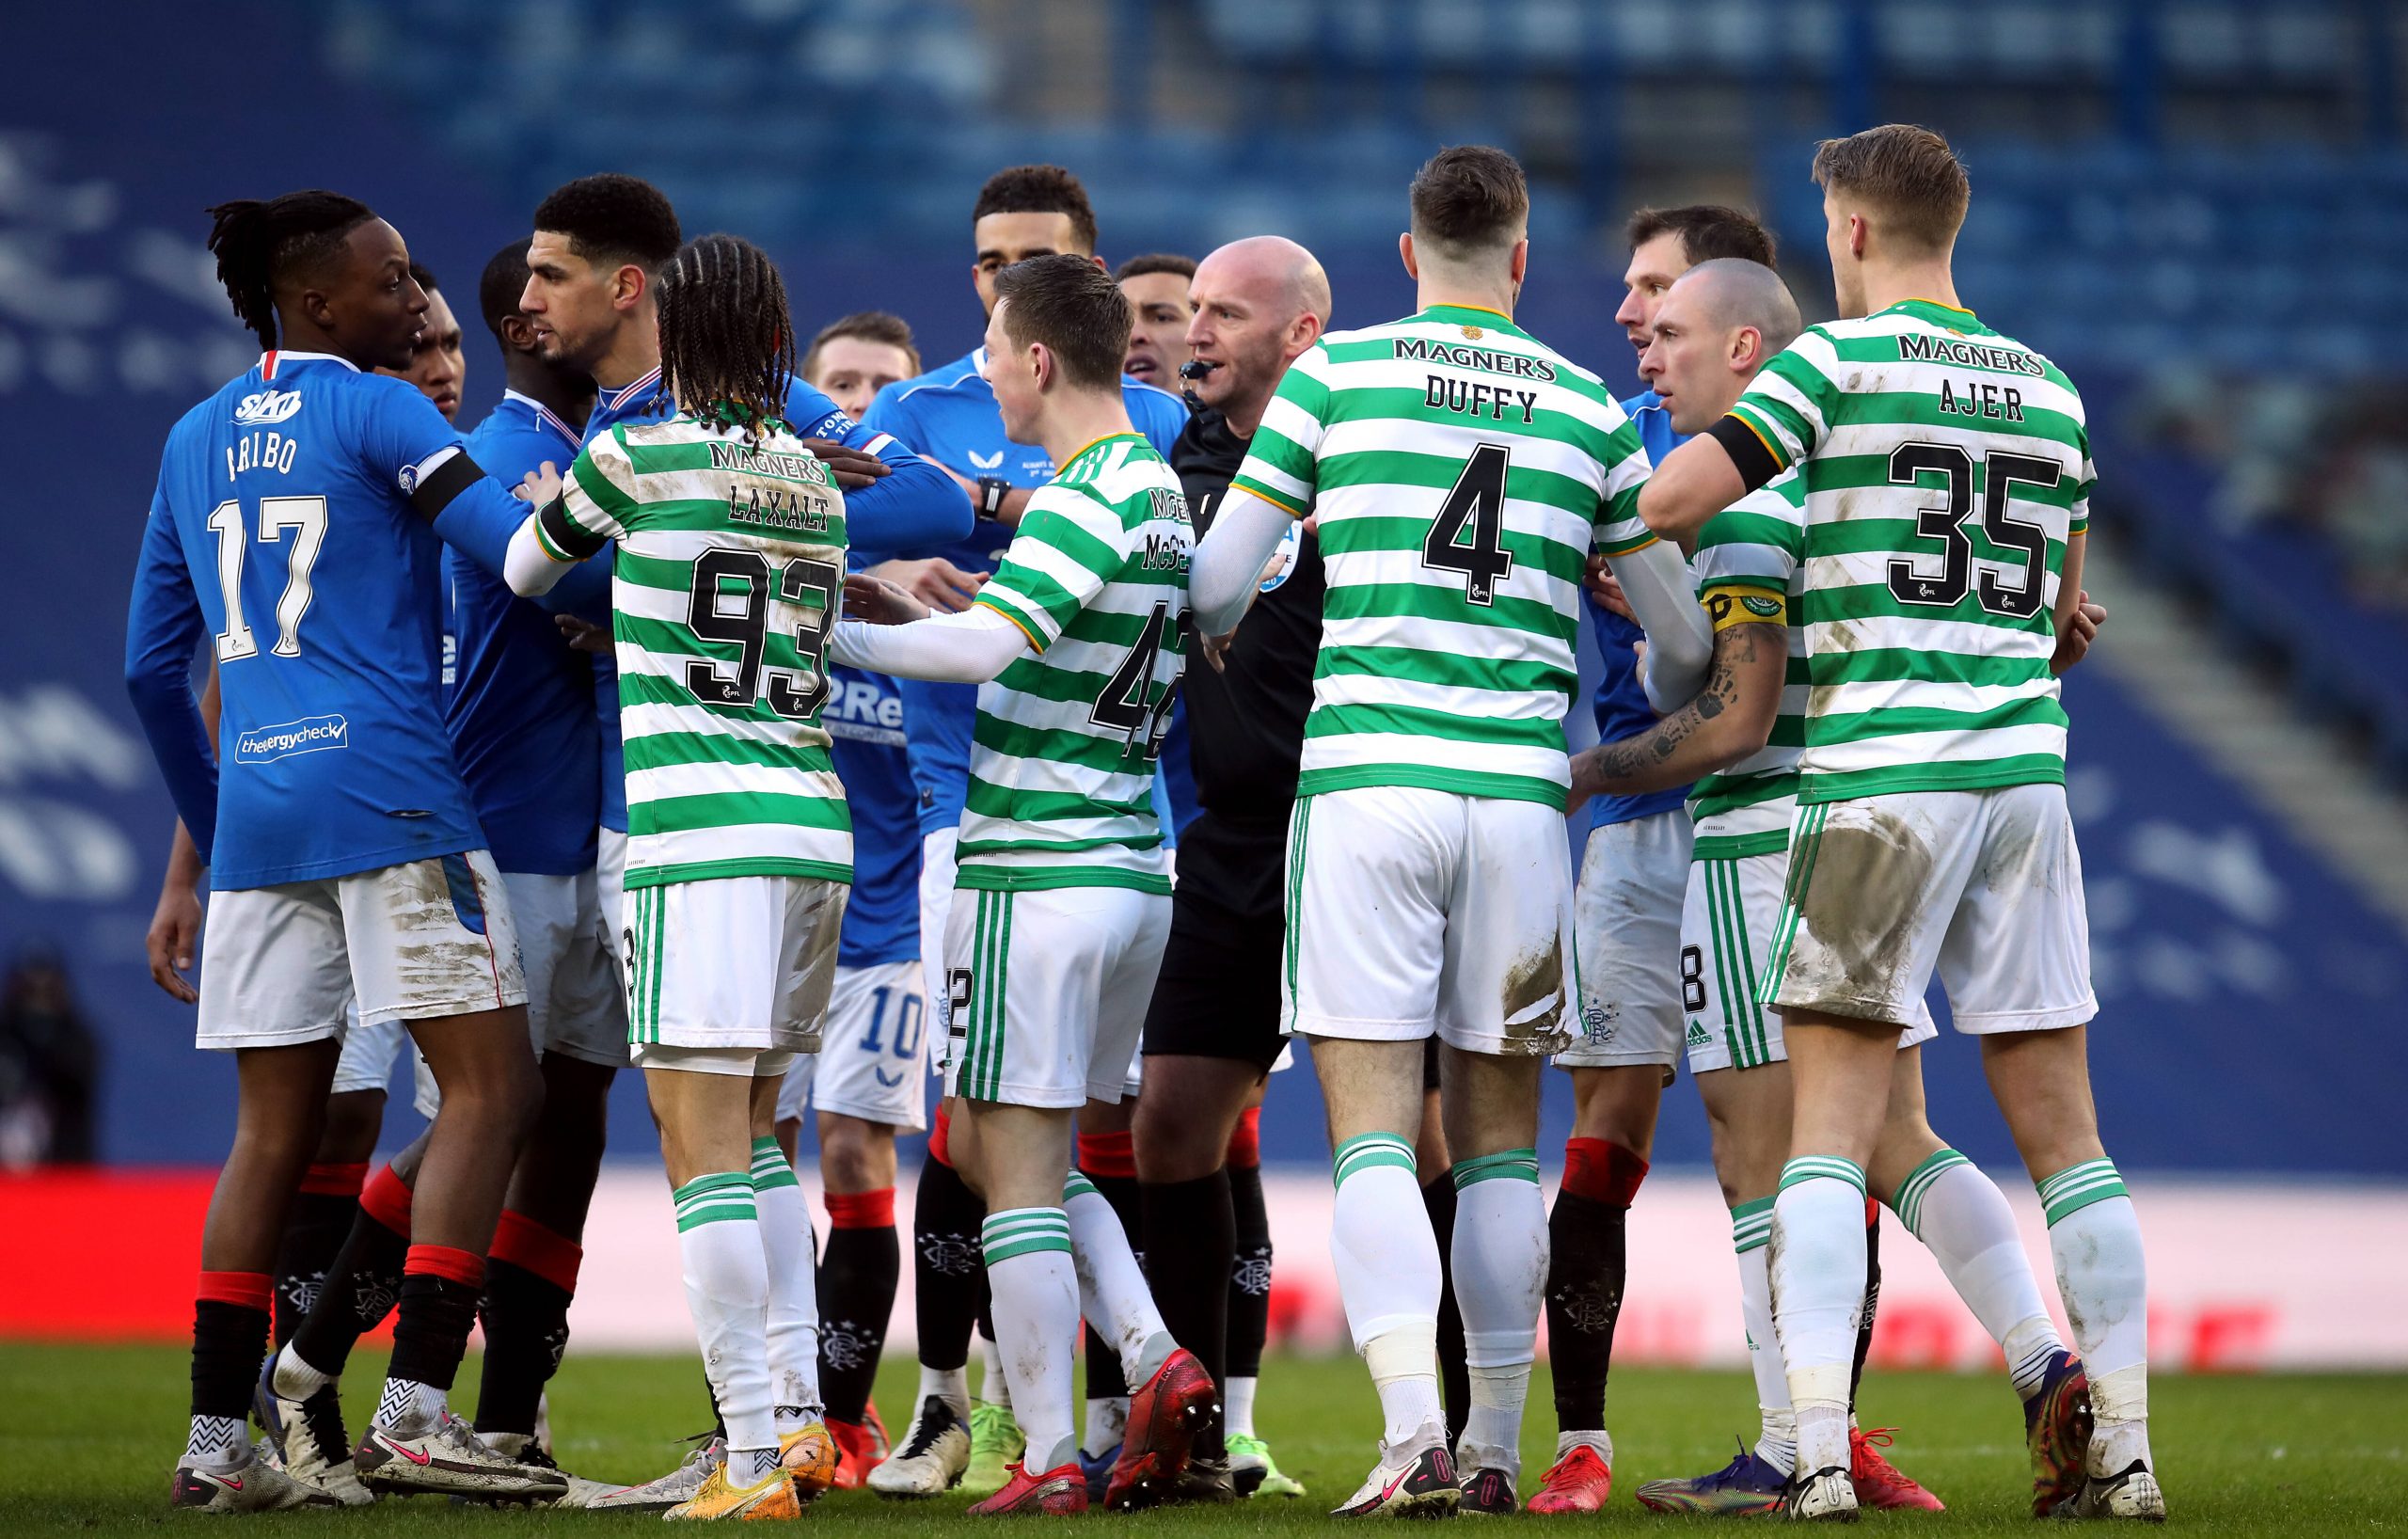 How Did The Fixture Between Celtic And Rangers Play Out - Rangers and Celtic